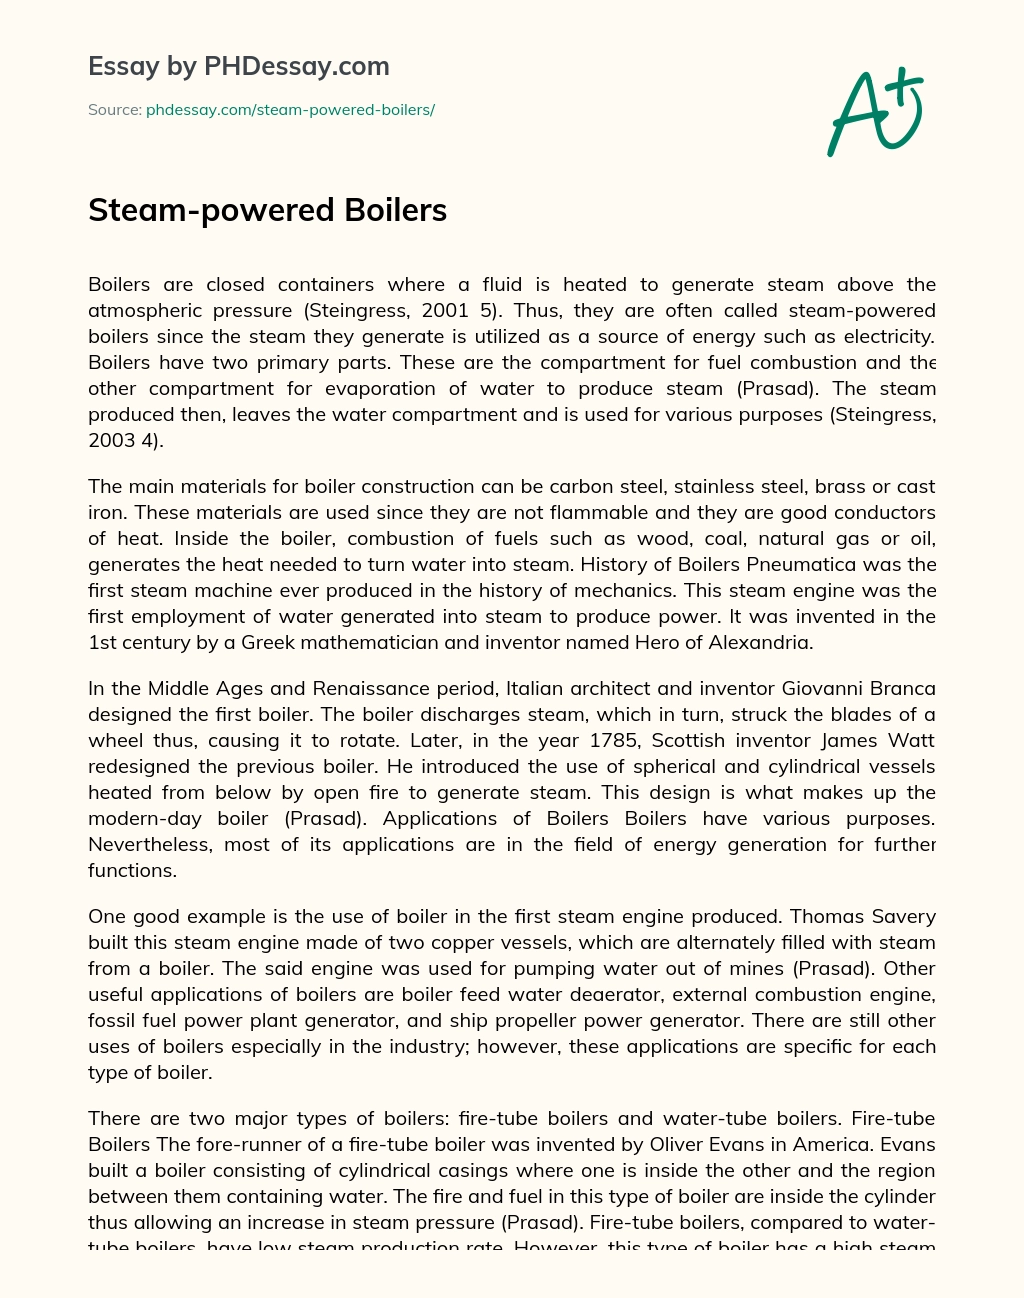 Boilers: Generating Steam for Energy Production and Industrial Processes essay